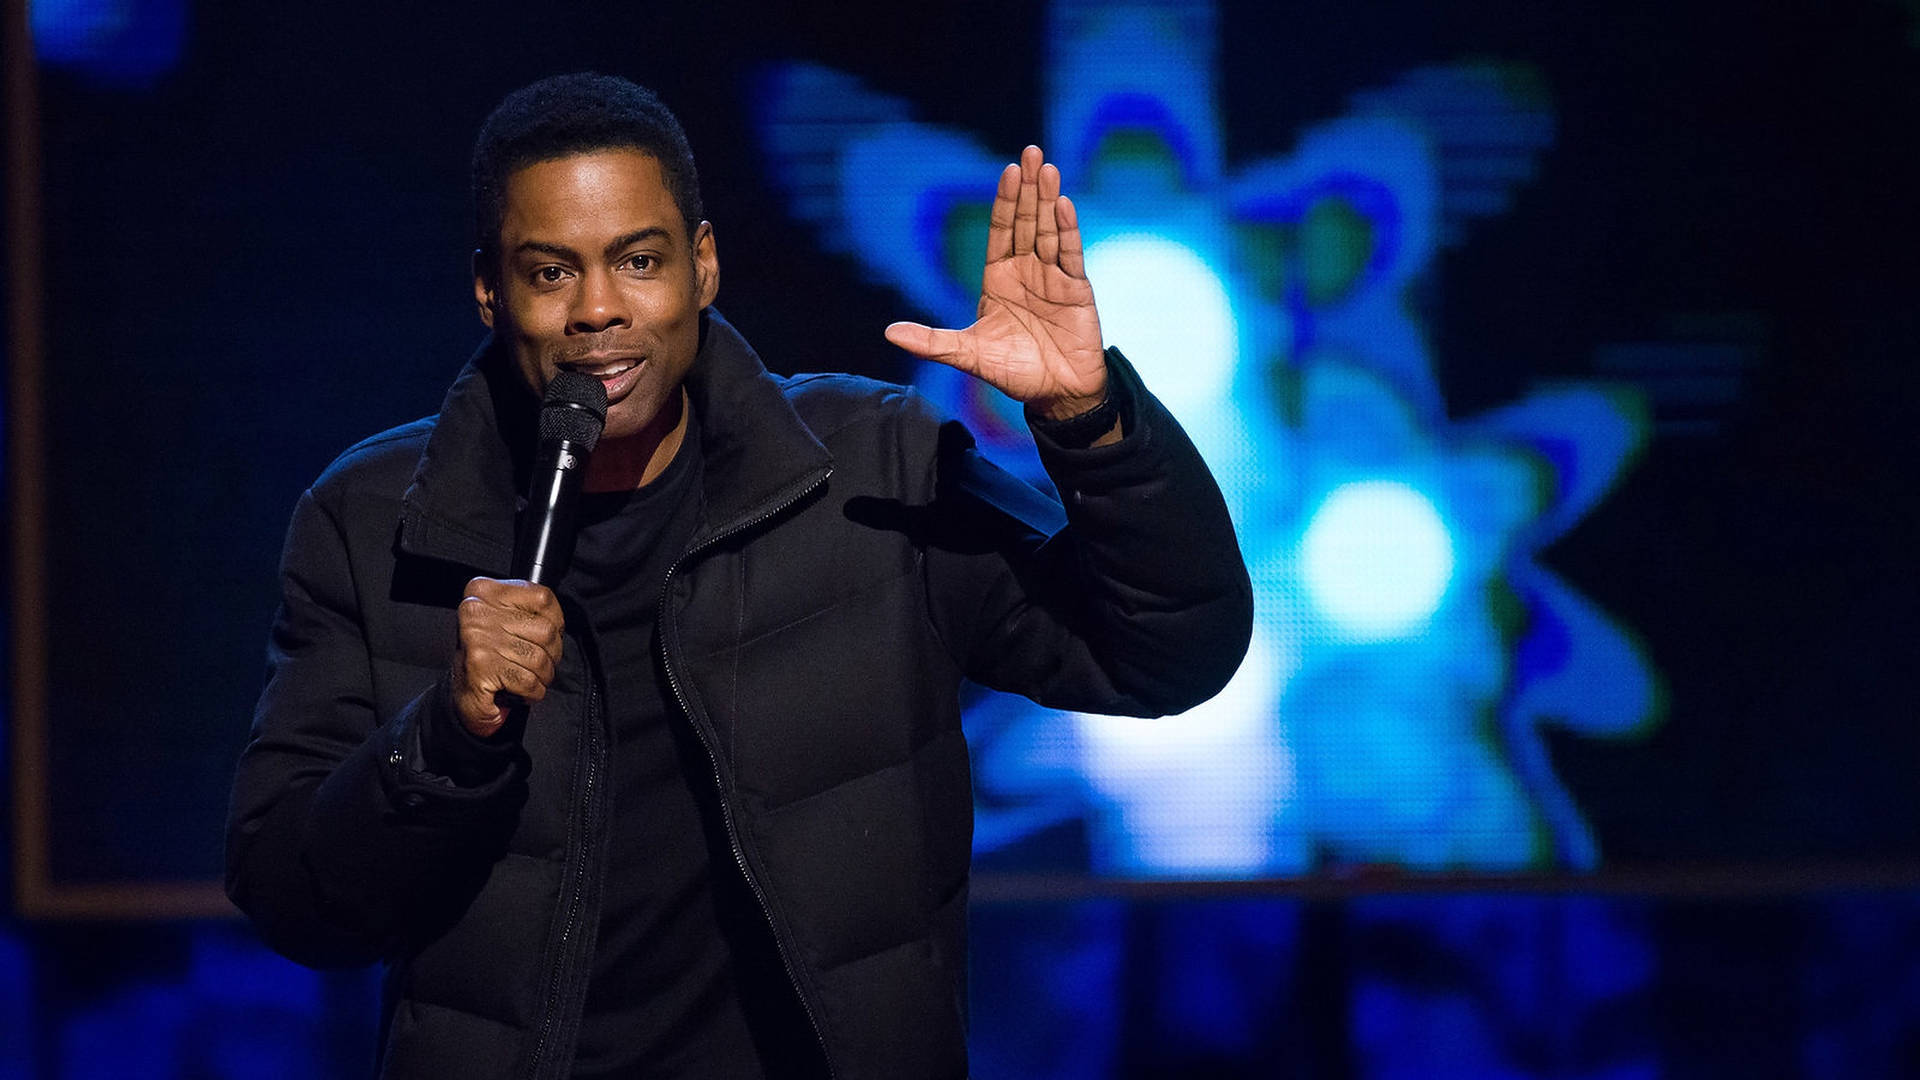 Chris Rock During A Live Stand-up Performance Background